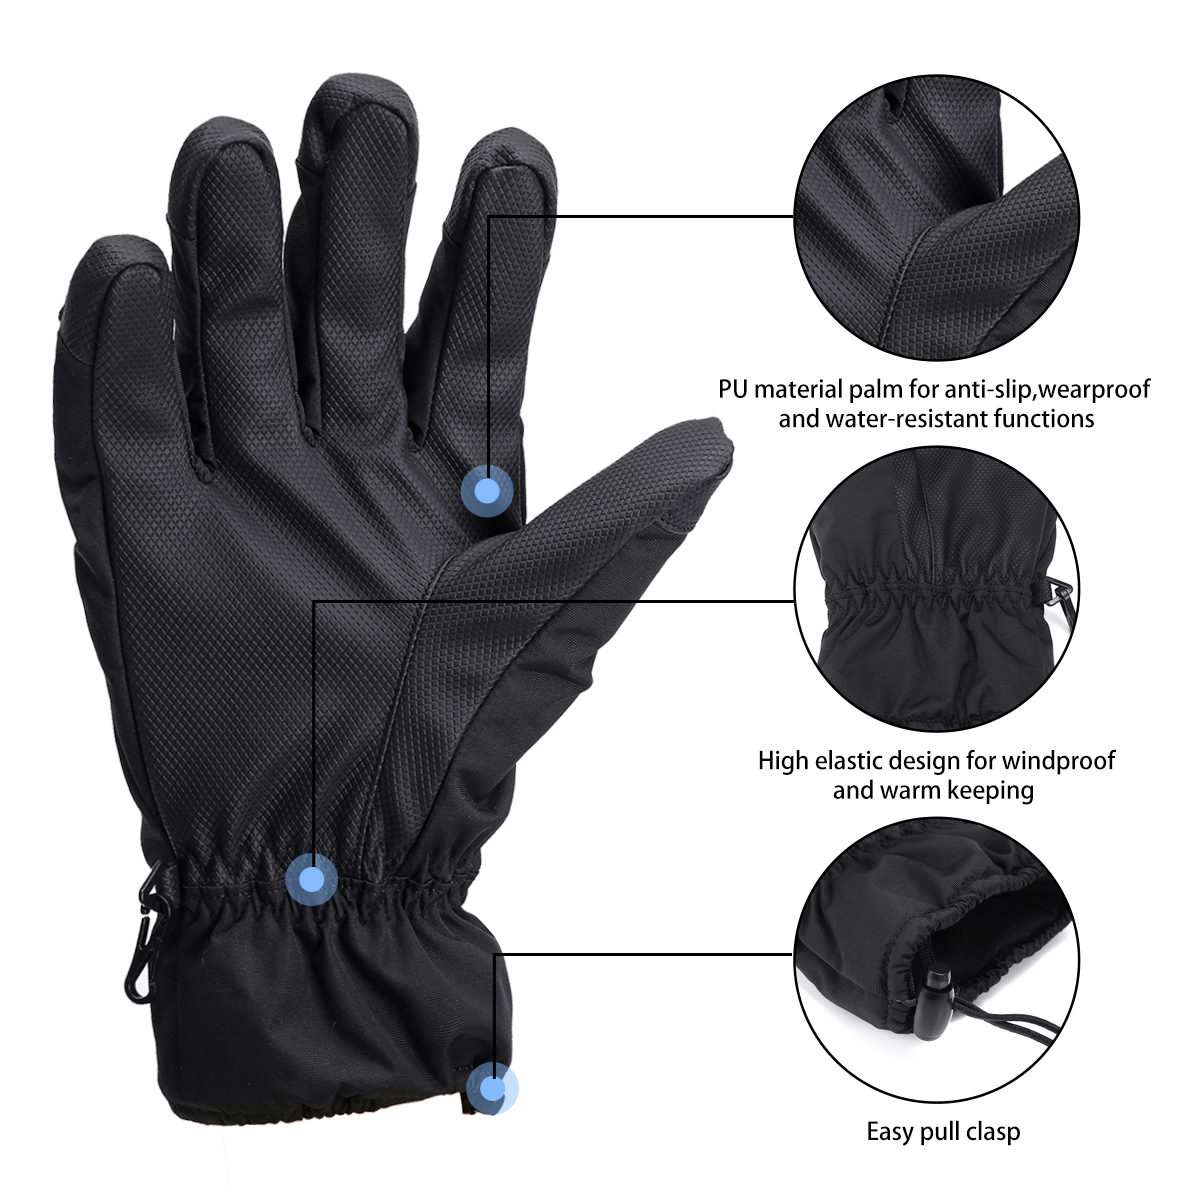 CAMTOA-Winter-Ski-Gloves-3M-Thinsulate-Warm-Waterproof-Breathable-Snow-Gloves-for-Men-and-Women-1397724